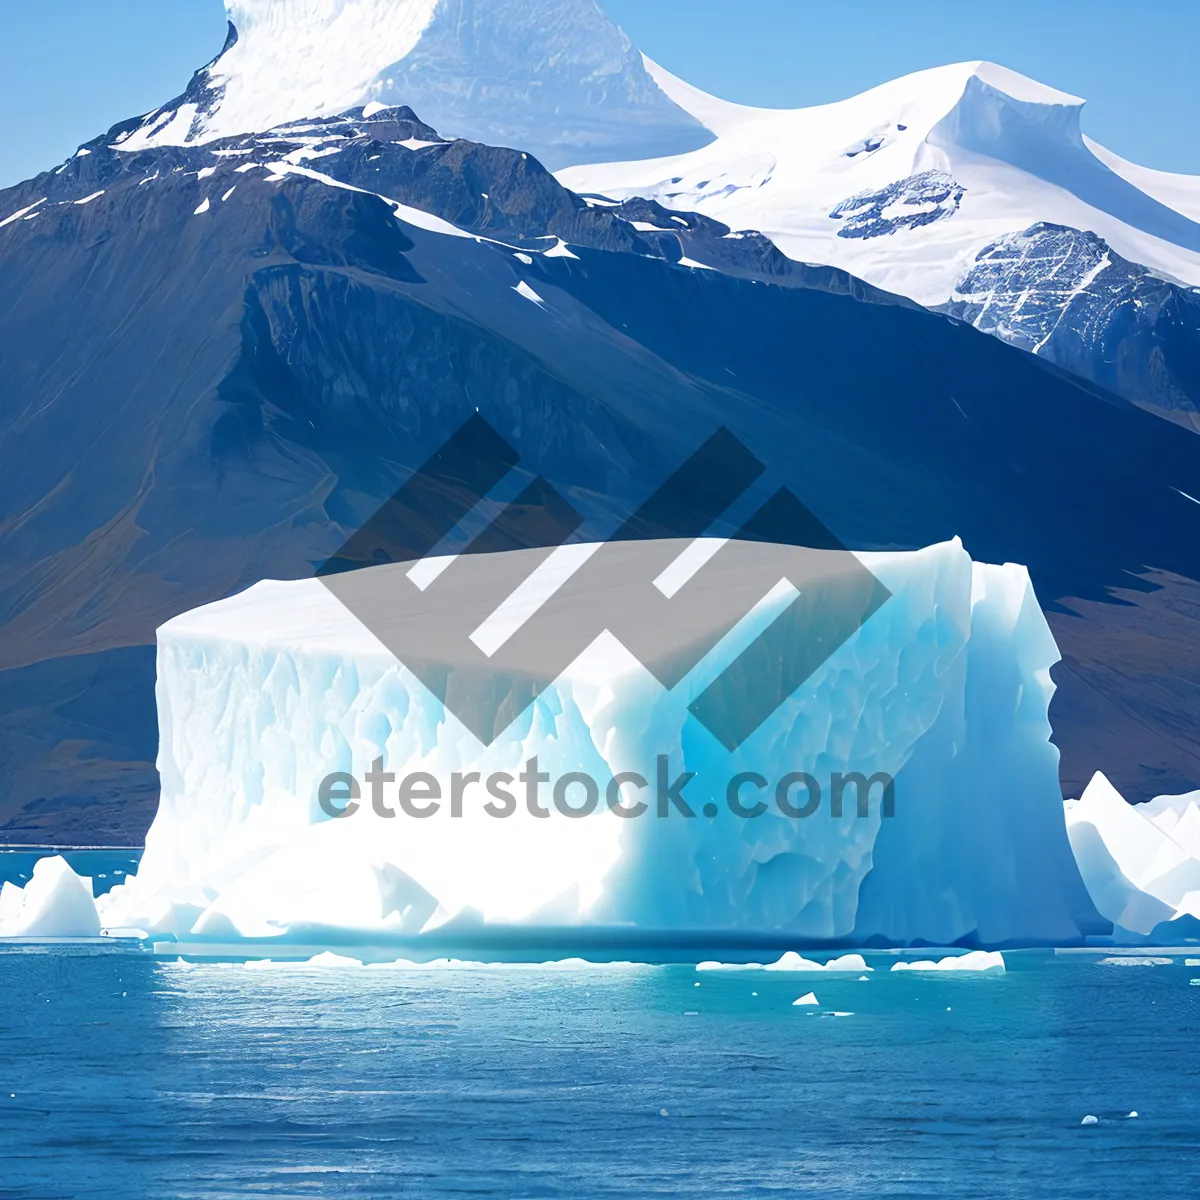 Picture of Snowy Peak Reflections on Arctic Ocean